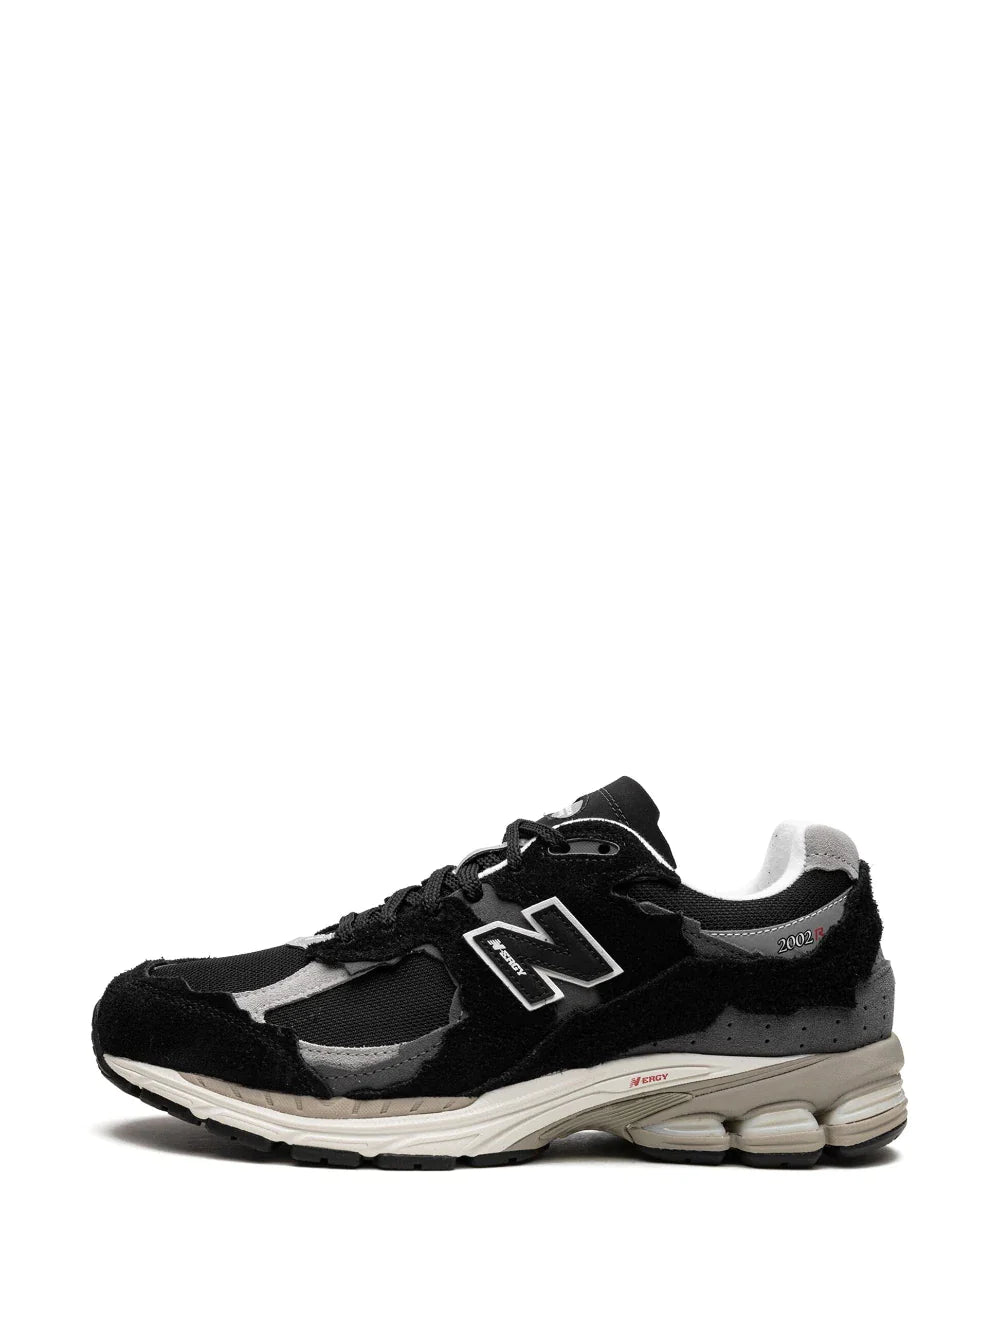 New Balance 2002R Protection Pack Black Sale